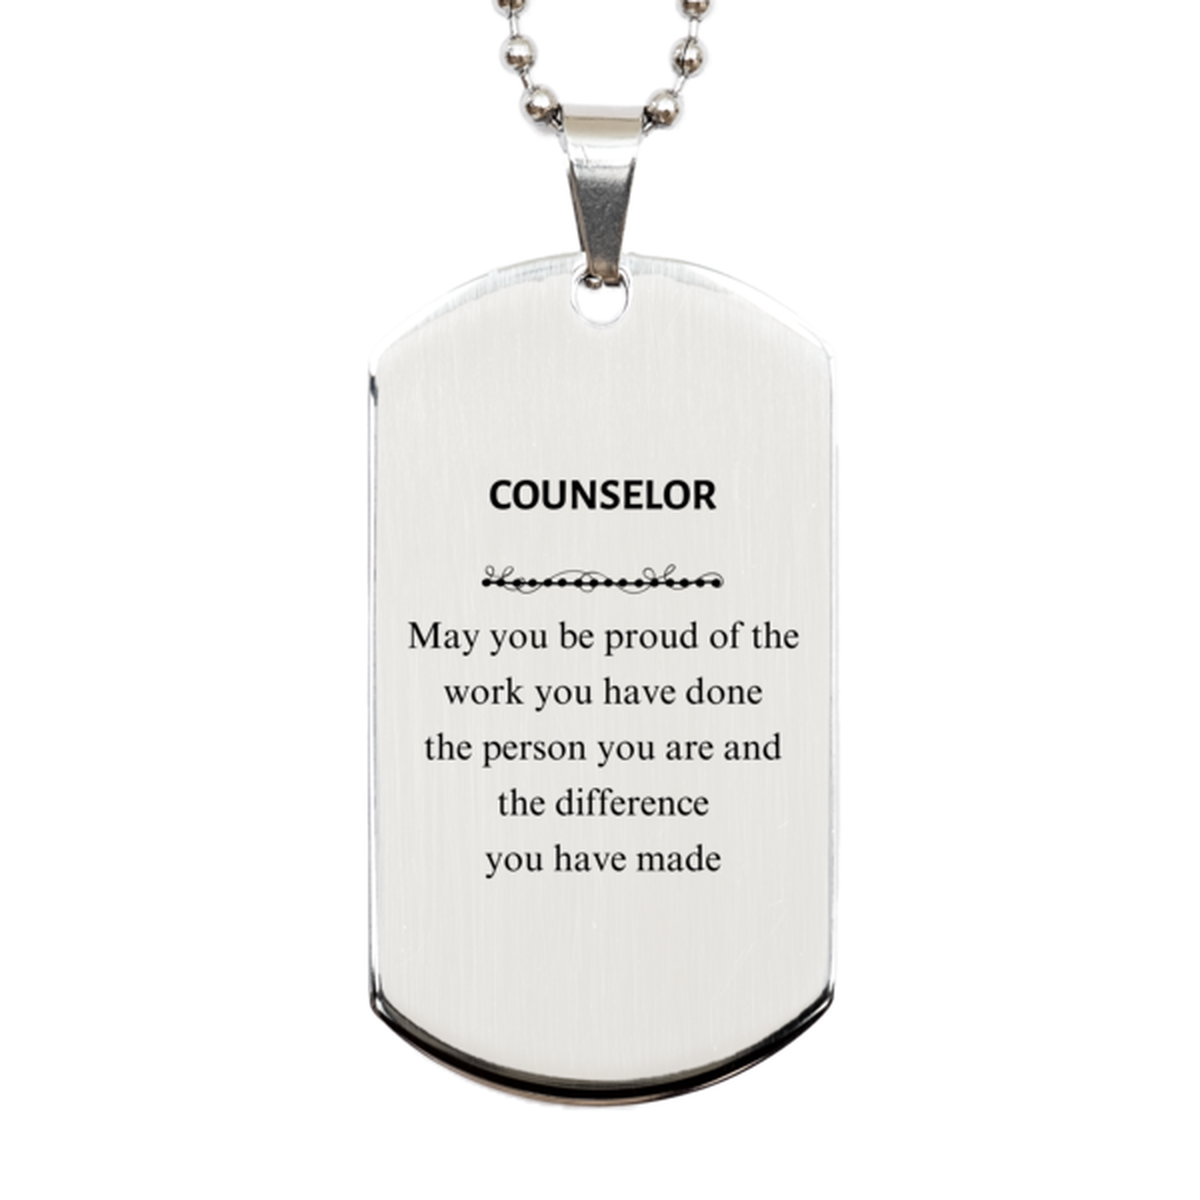 Counselor May you be proud of the work you have done, Retirement Counselor Silver Dog Tag for Colleague Appreciation Gifts Amazing for Counselor